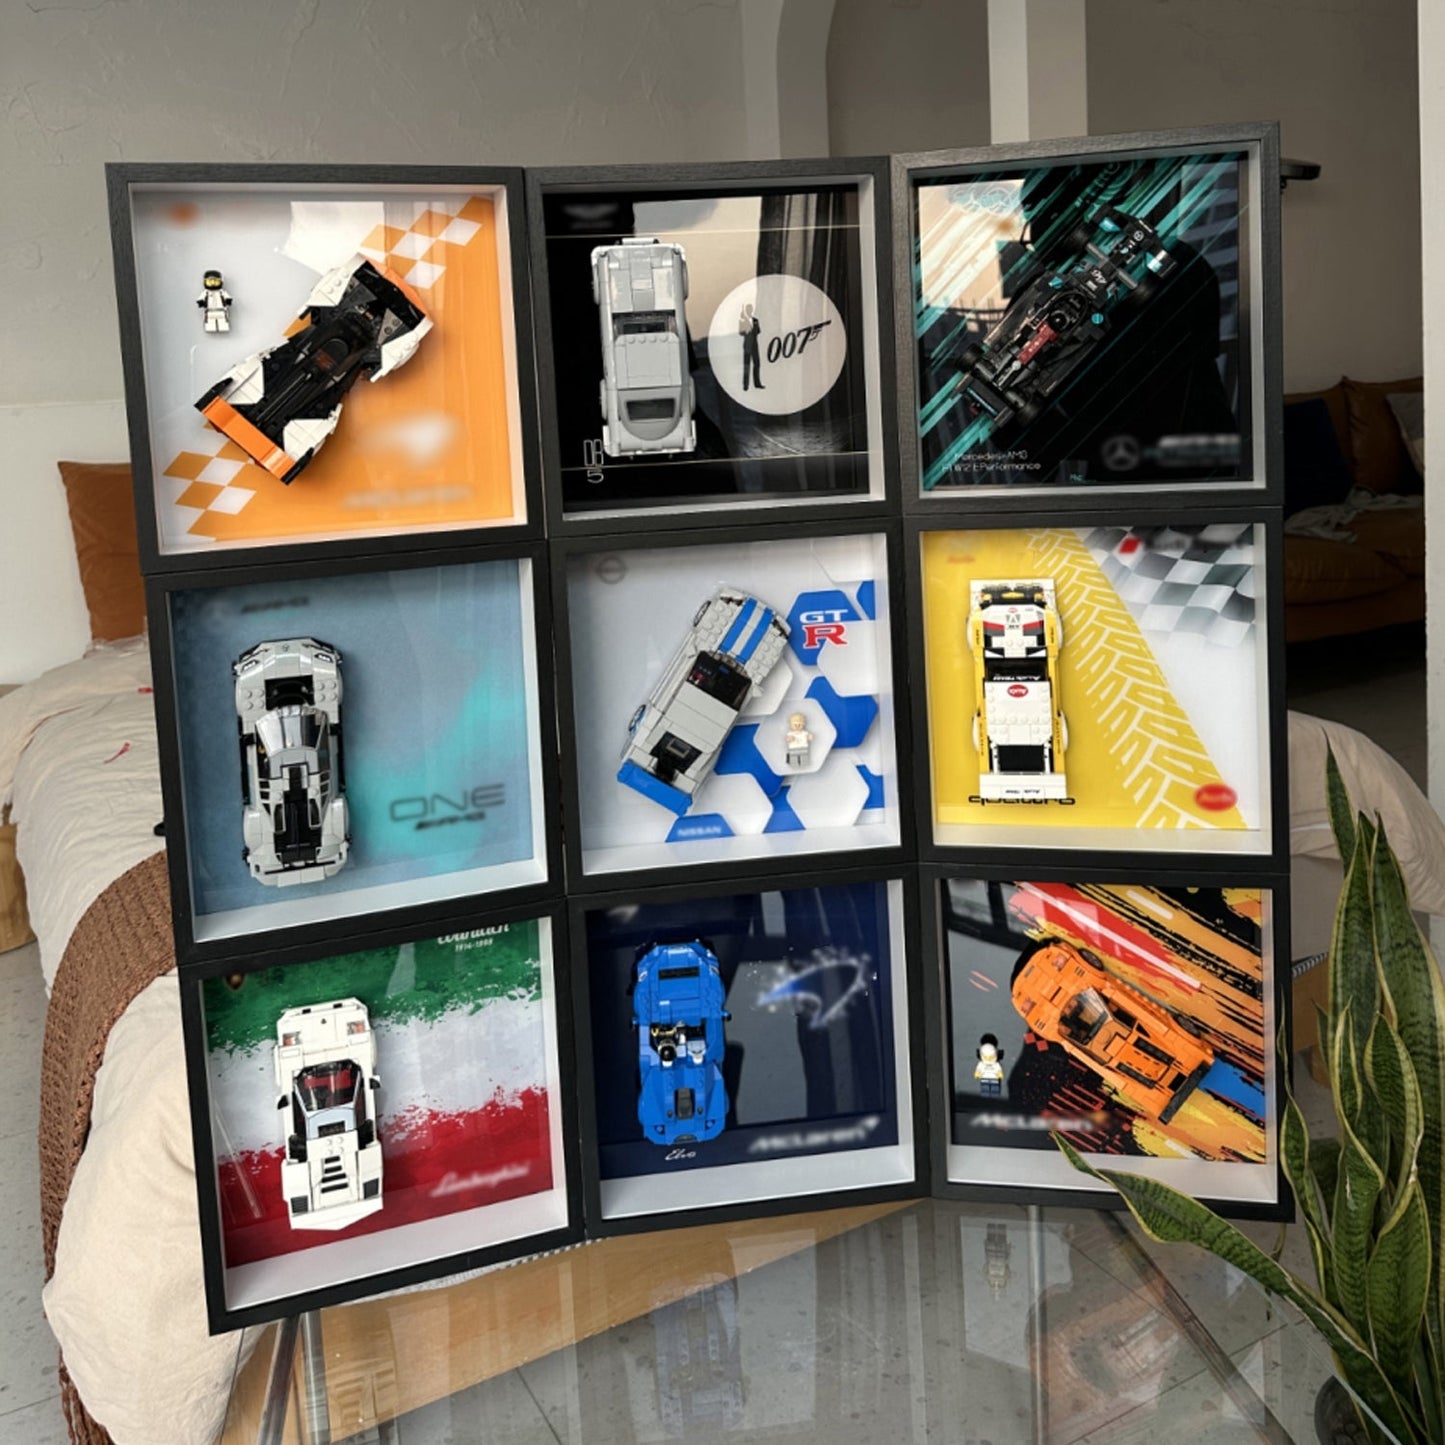 iLuane Display Wallboard for Lego Speed Champions 1985 Audi Sport Quattro S1 76897 Toy Cars Building Set, Adult Collectibles Lego Car Wall Mount, Gifts for Lego Lovers(Only Display Wallboard)